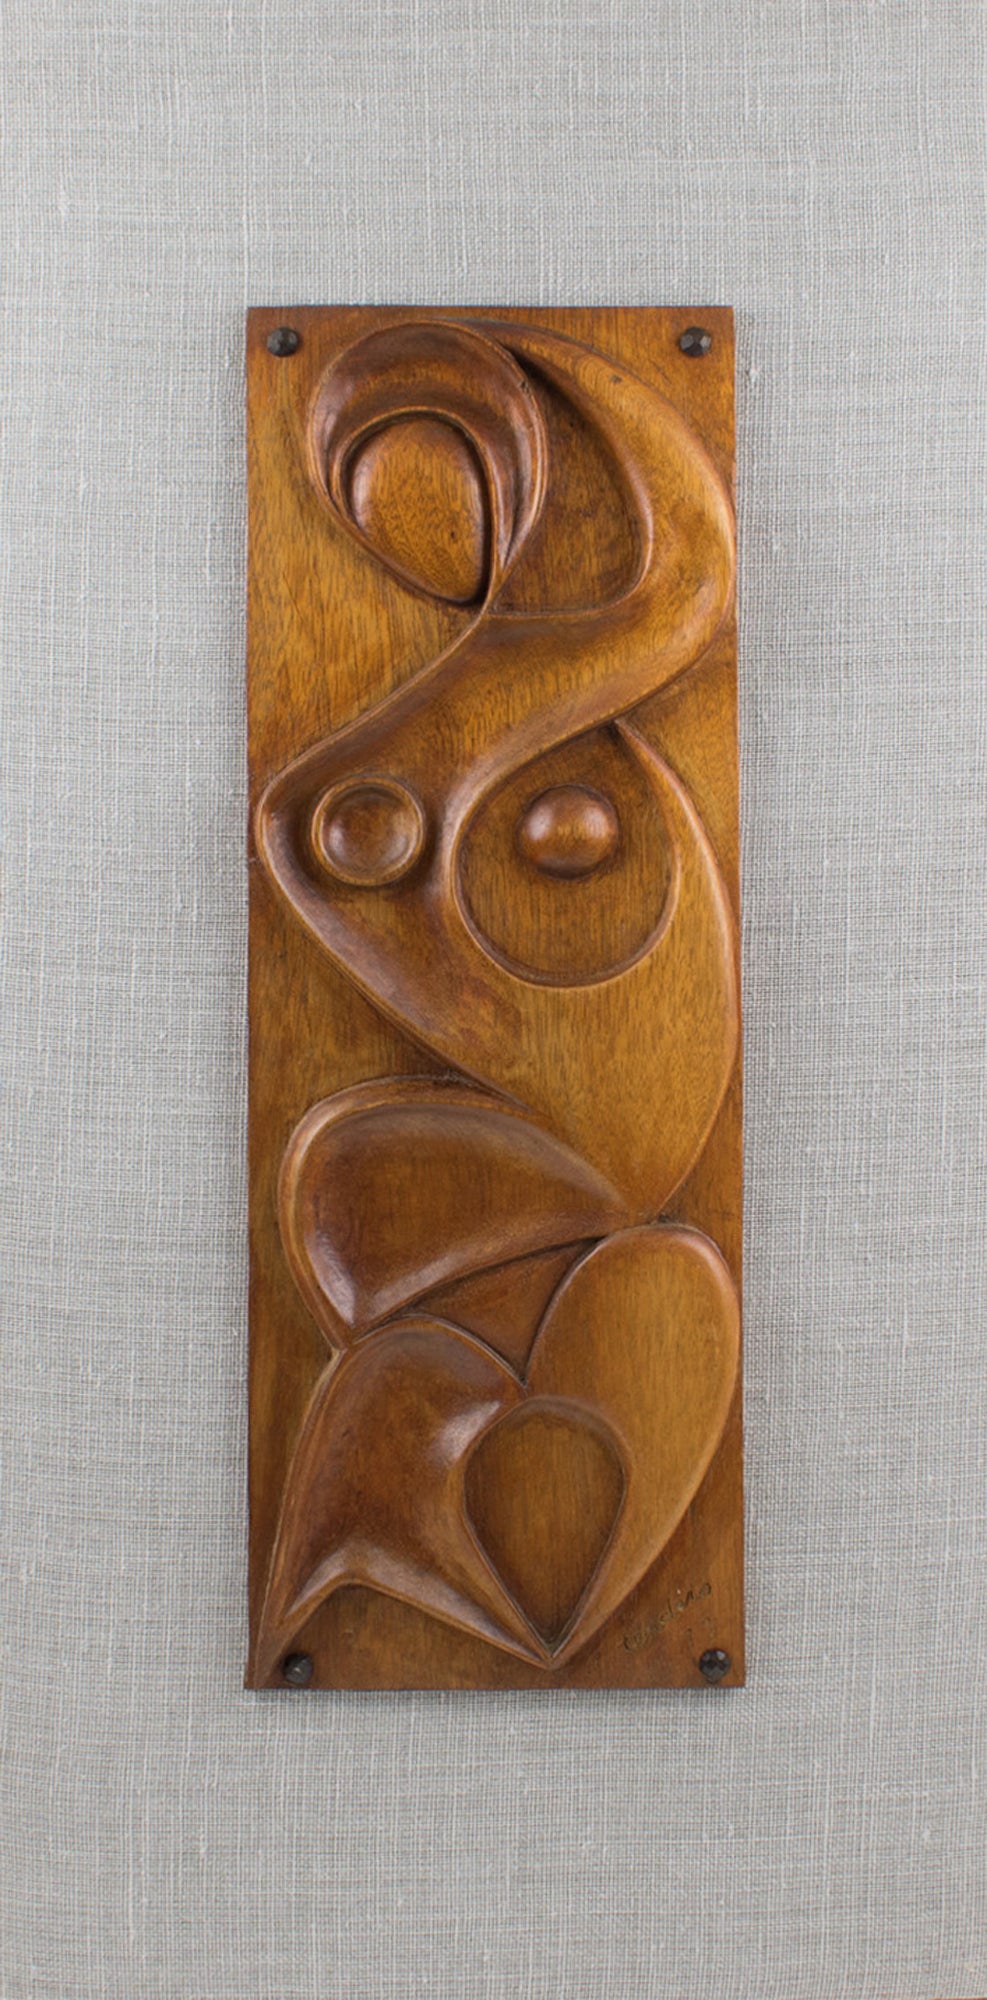 Maxime Tendero Wall-Mounted Abstract Wooden Hand-Carved Art Sculpture Panel 1973 For Sale